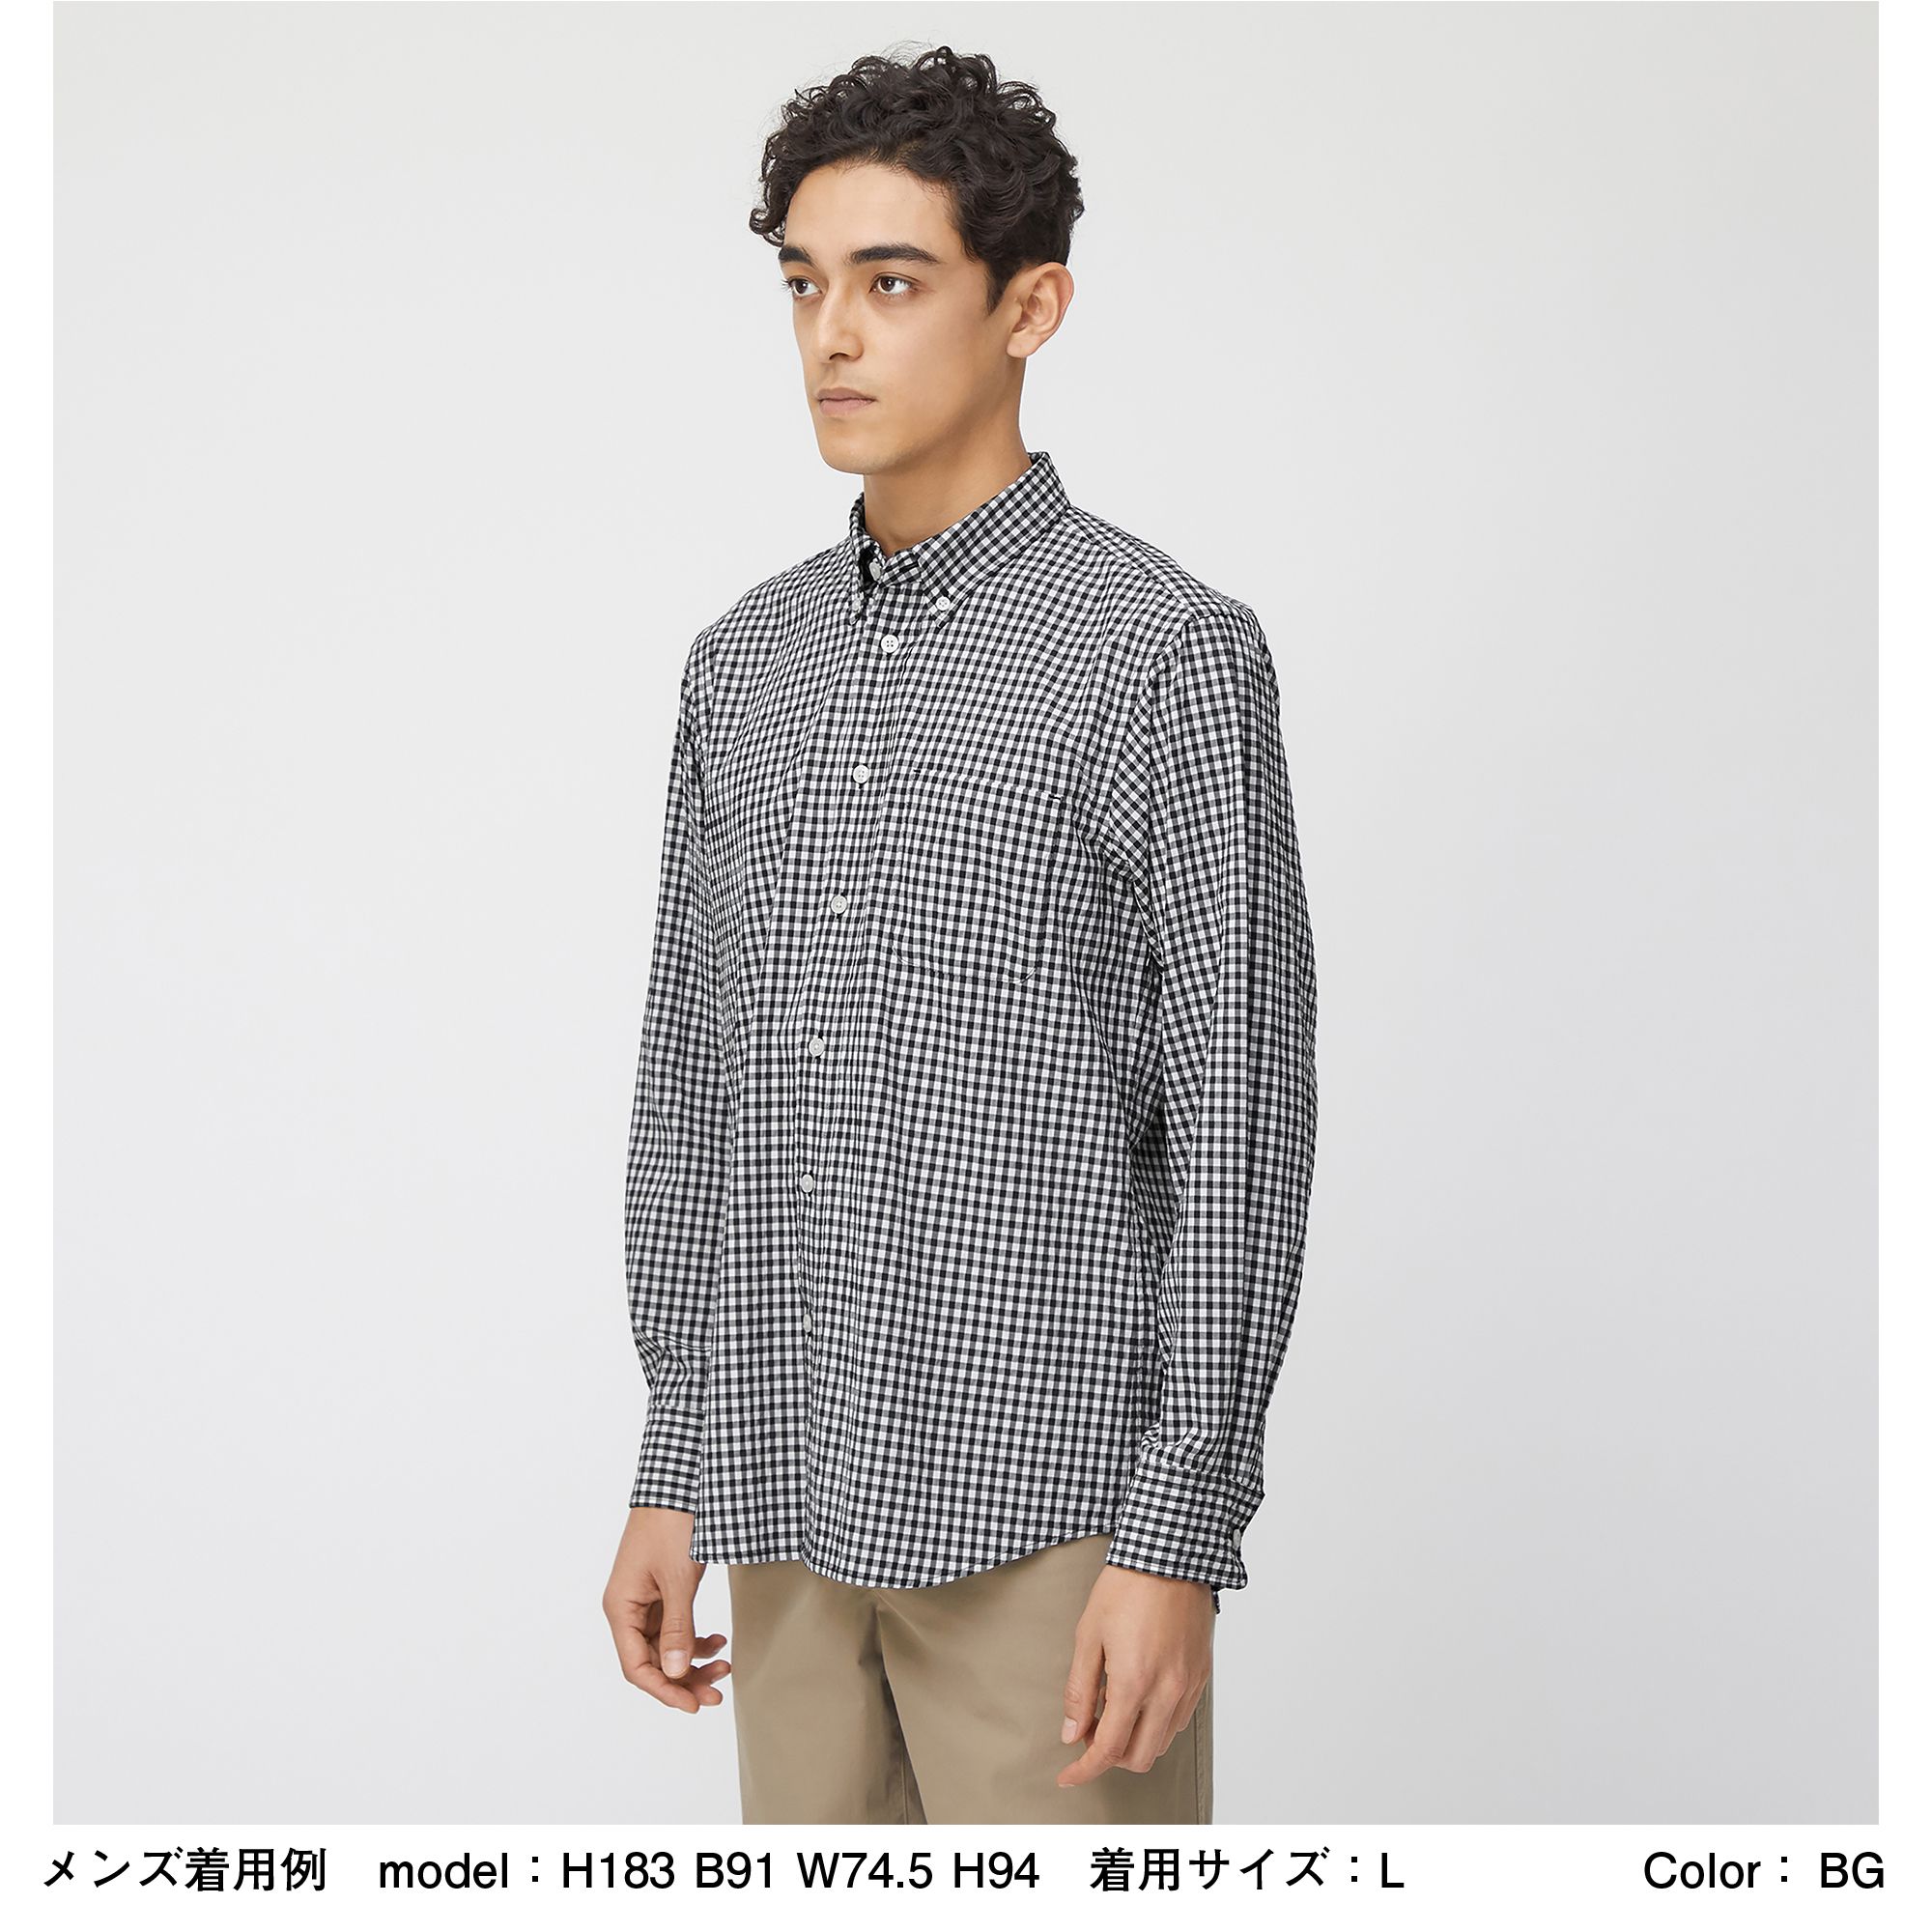 2022A/W新作送料無料 NEW THE NORTH FACE ザ ノースフェイス ロングスリーブヒデンバリーシャツ メンズ L S Hidden Valley Shirt NR11966 KN